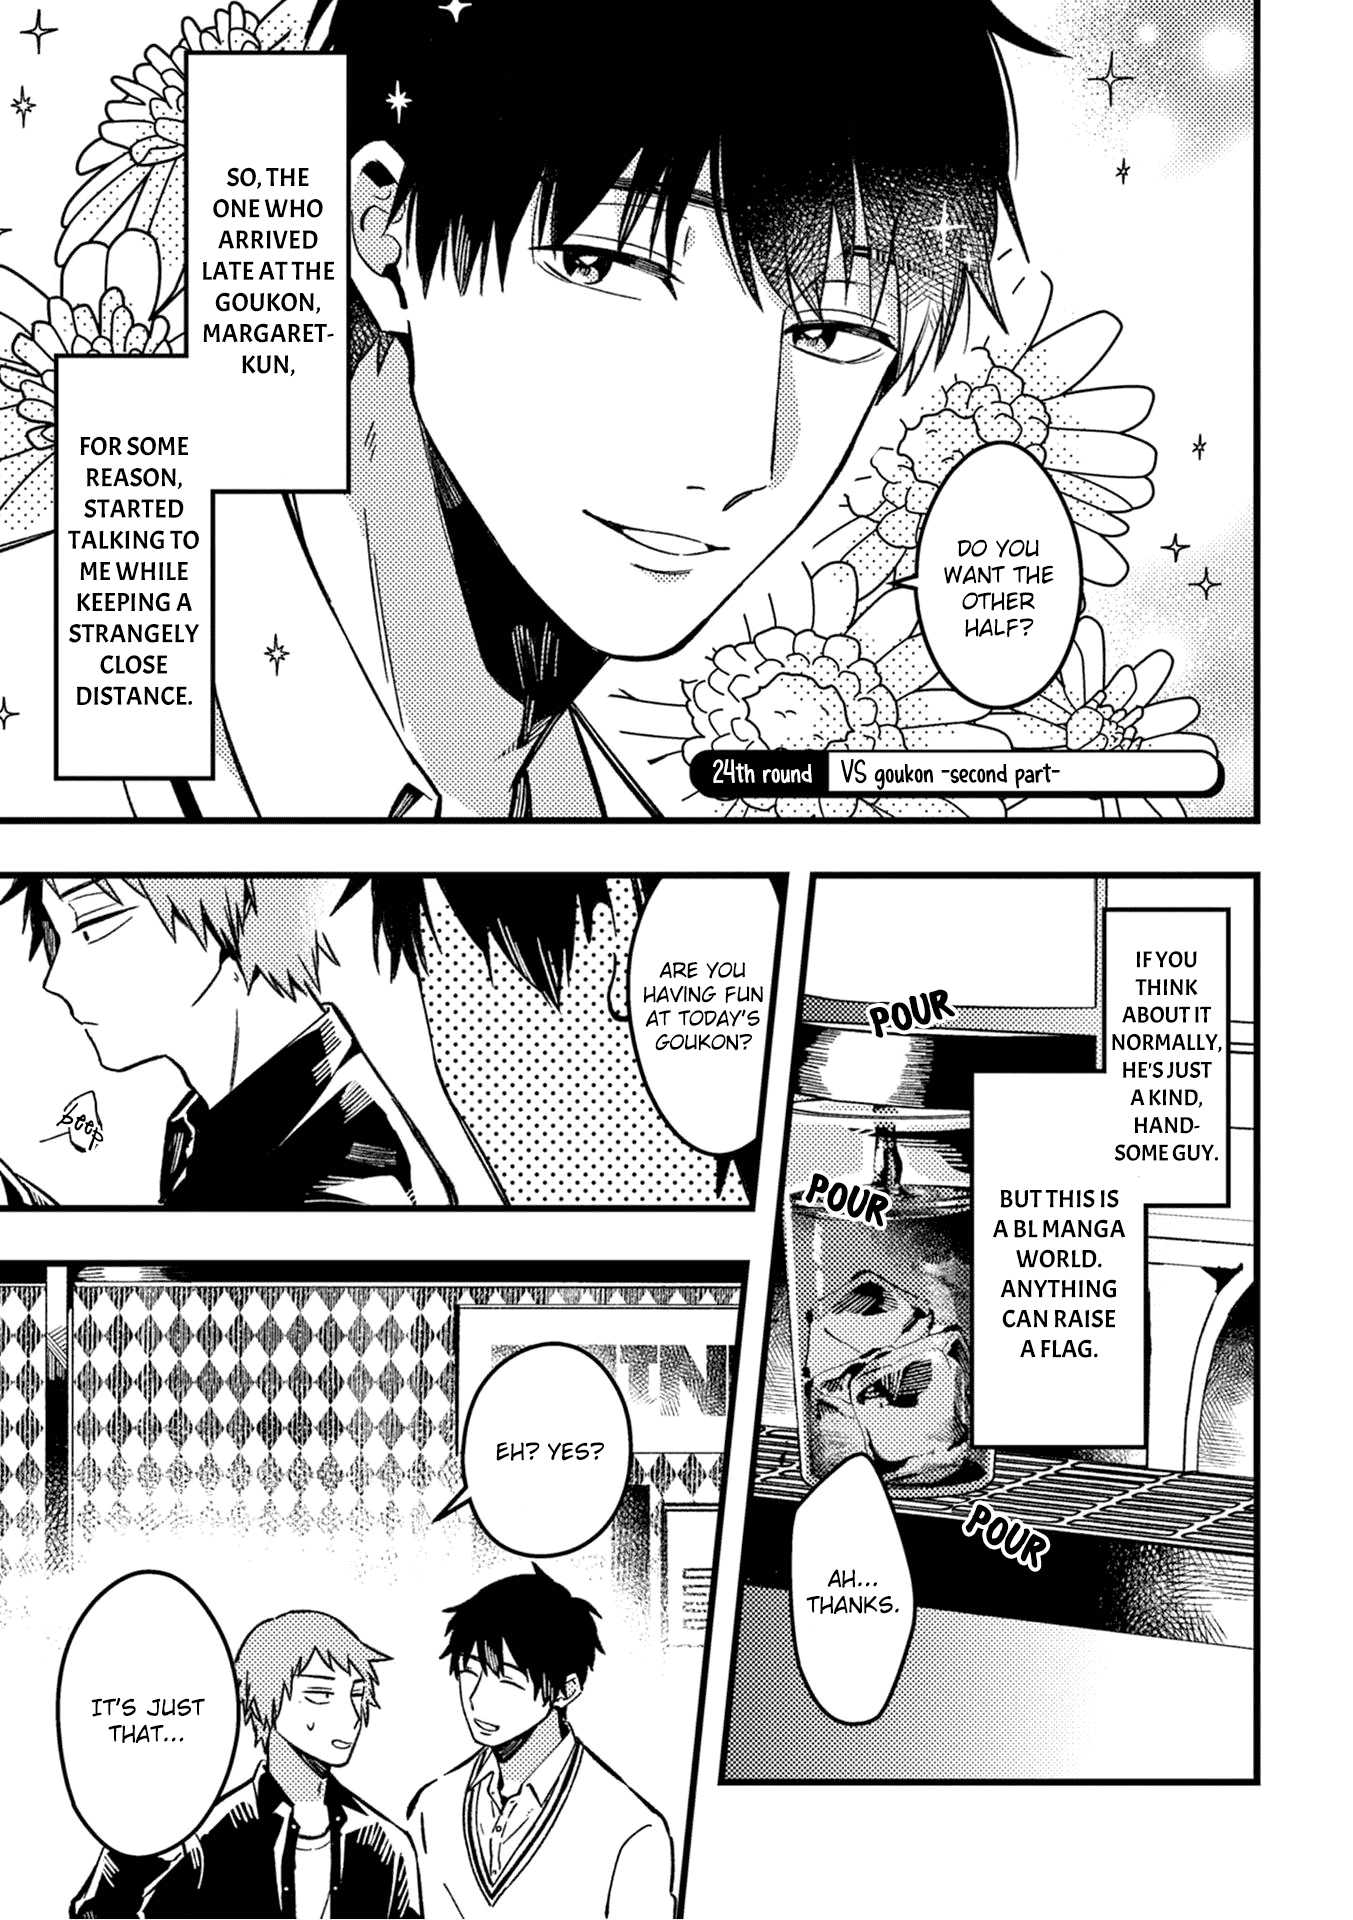 A World Where Everything Definitely Becomes Bl Vs. The Man Who Definitely Doesn't Want To Be In A Bl Vol.2 Chapter 24: Vs Goukon - Second Part - Picture 2